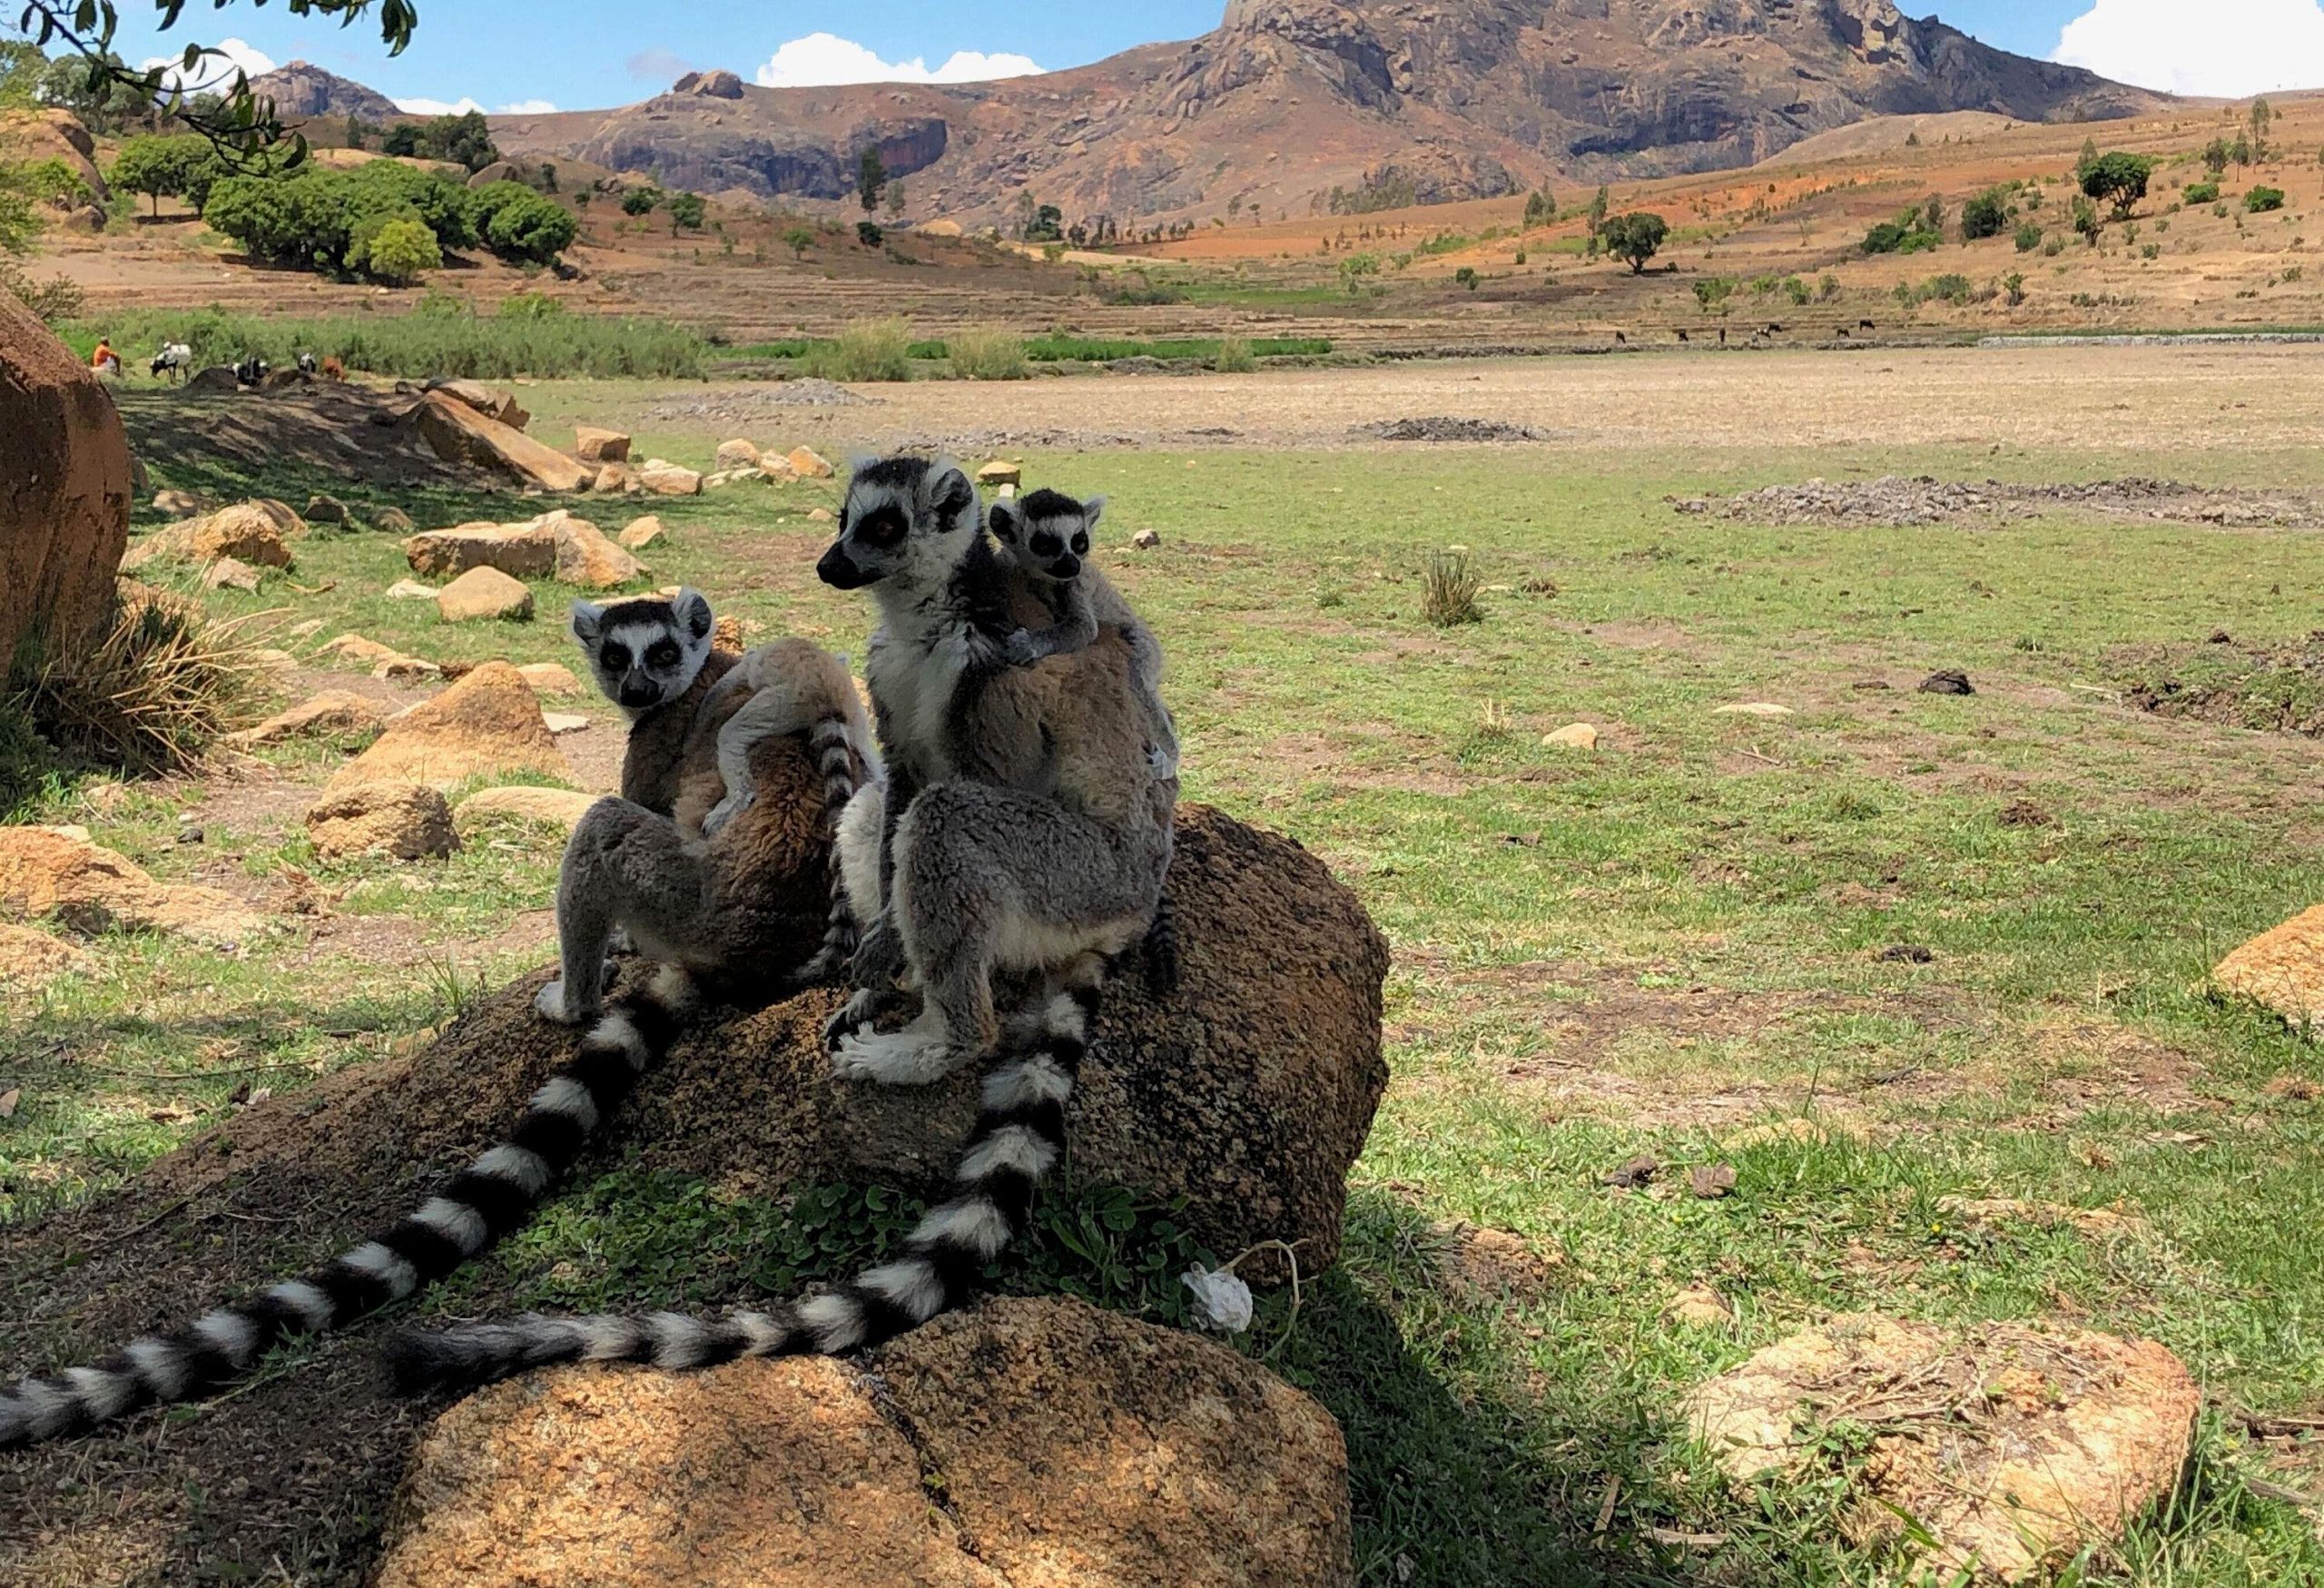 A family of lemurs sit on a rock under a shade with views of a mountainous terrain in the distance.